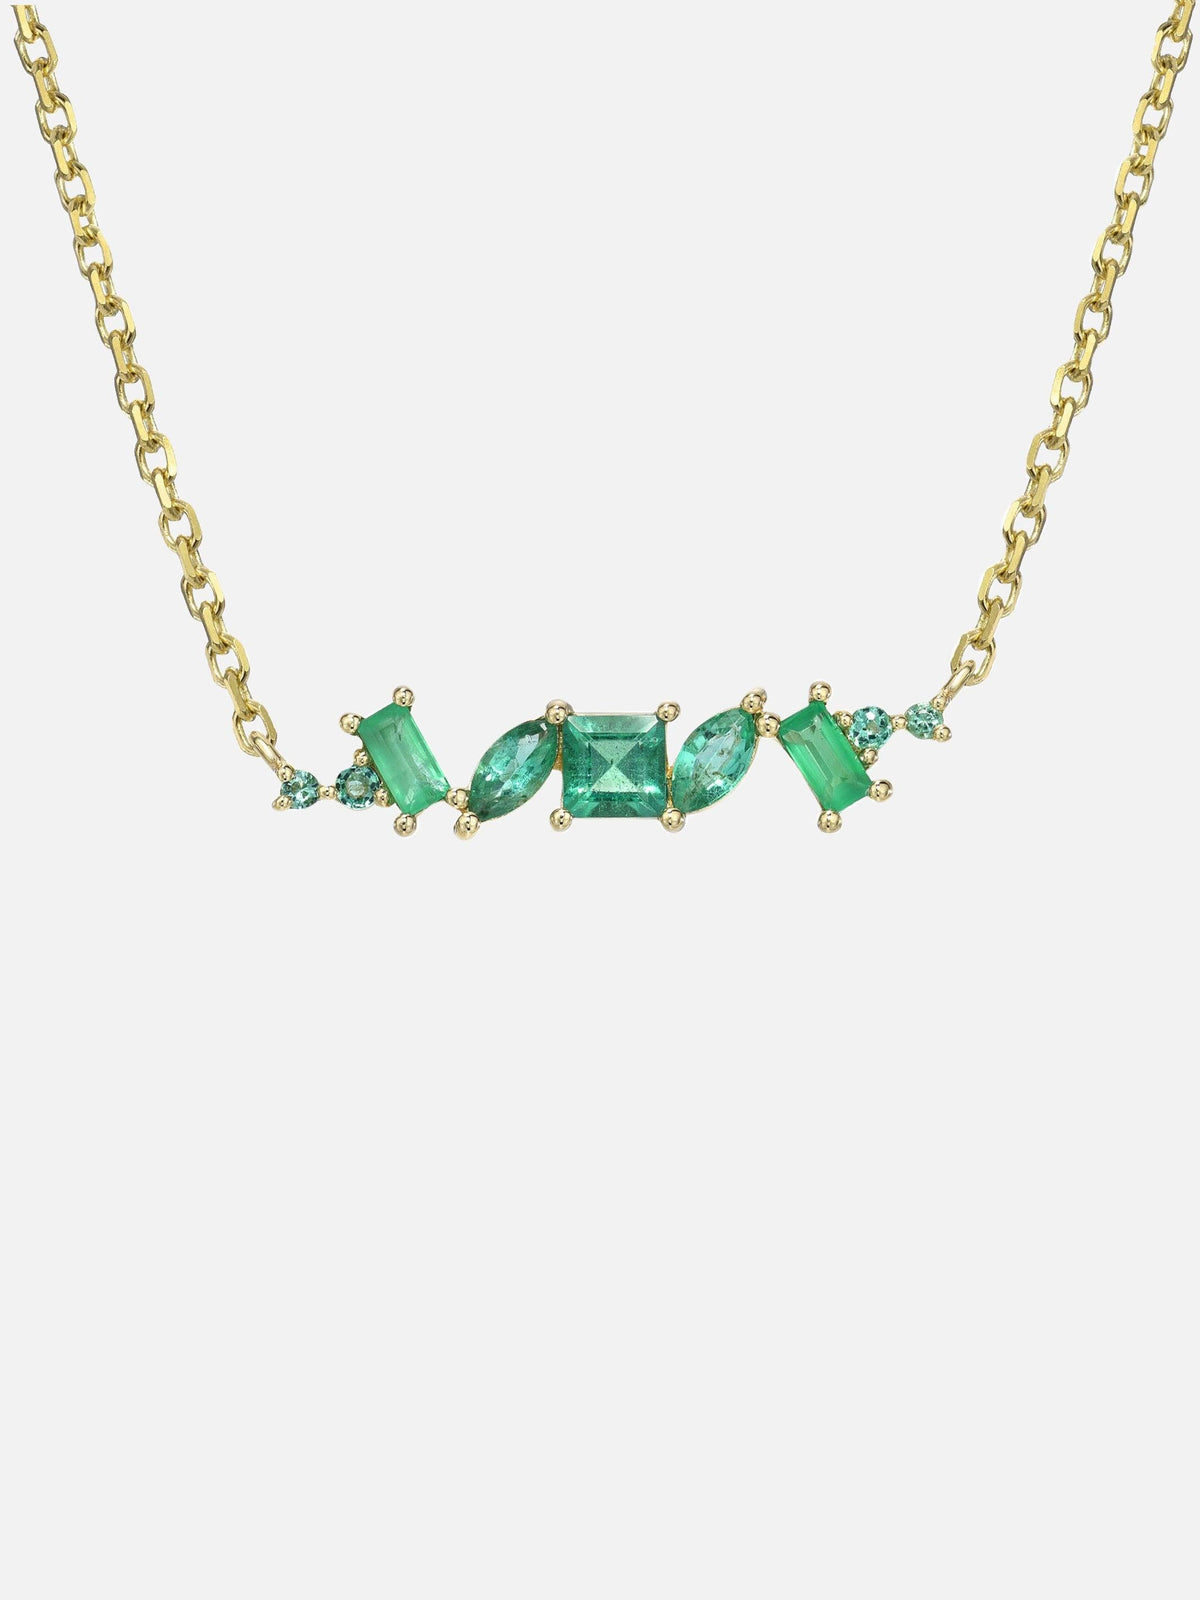 Emerald Chaos Necklace - Meredith Young - At Present